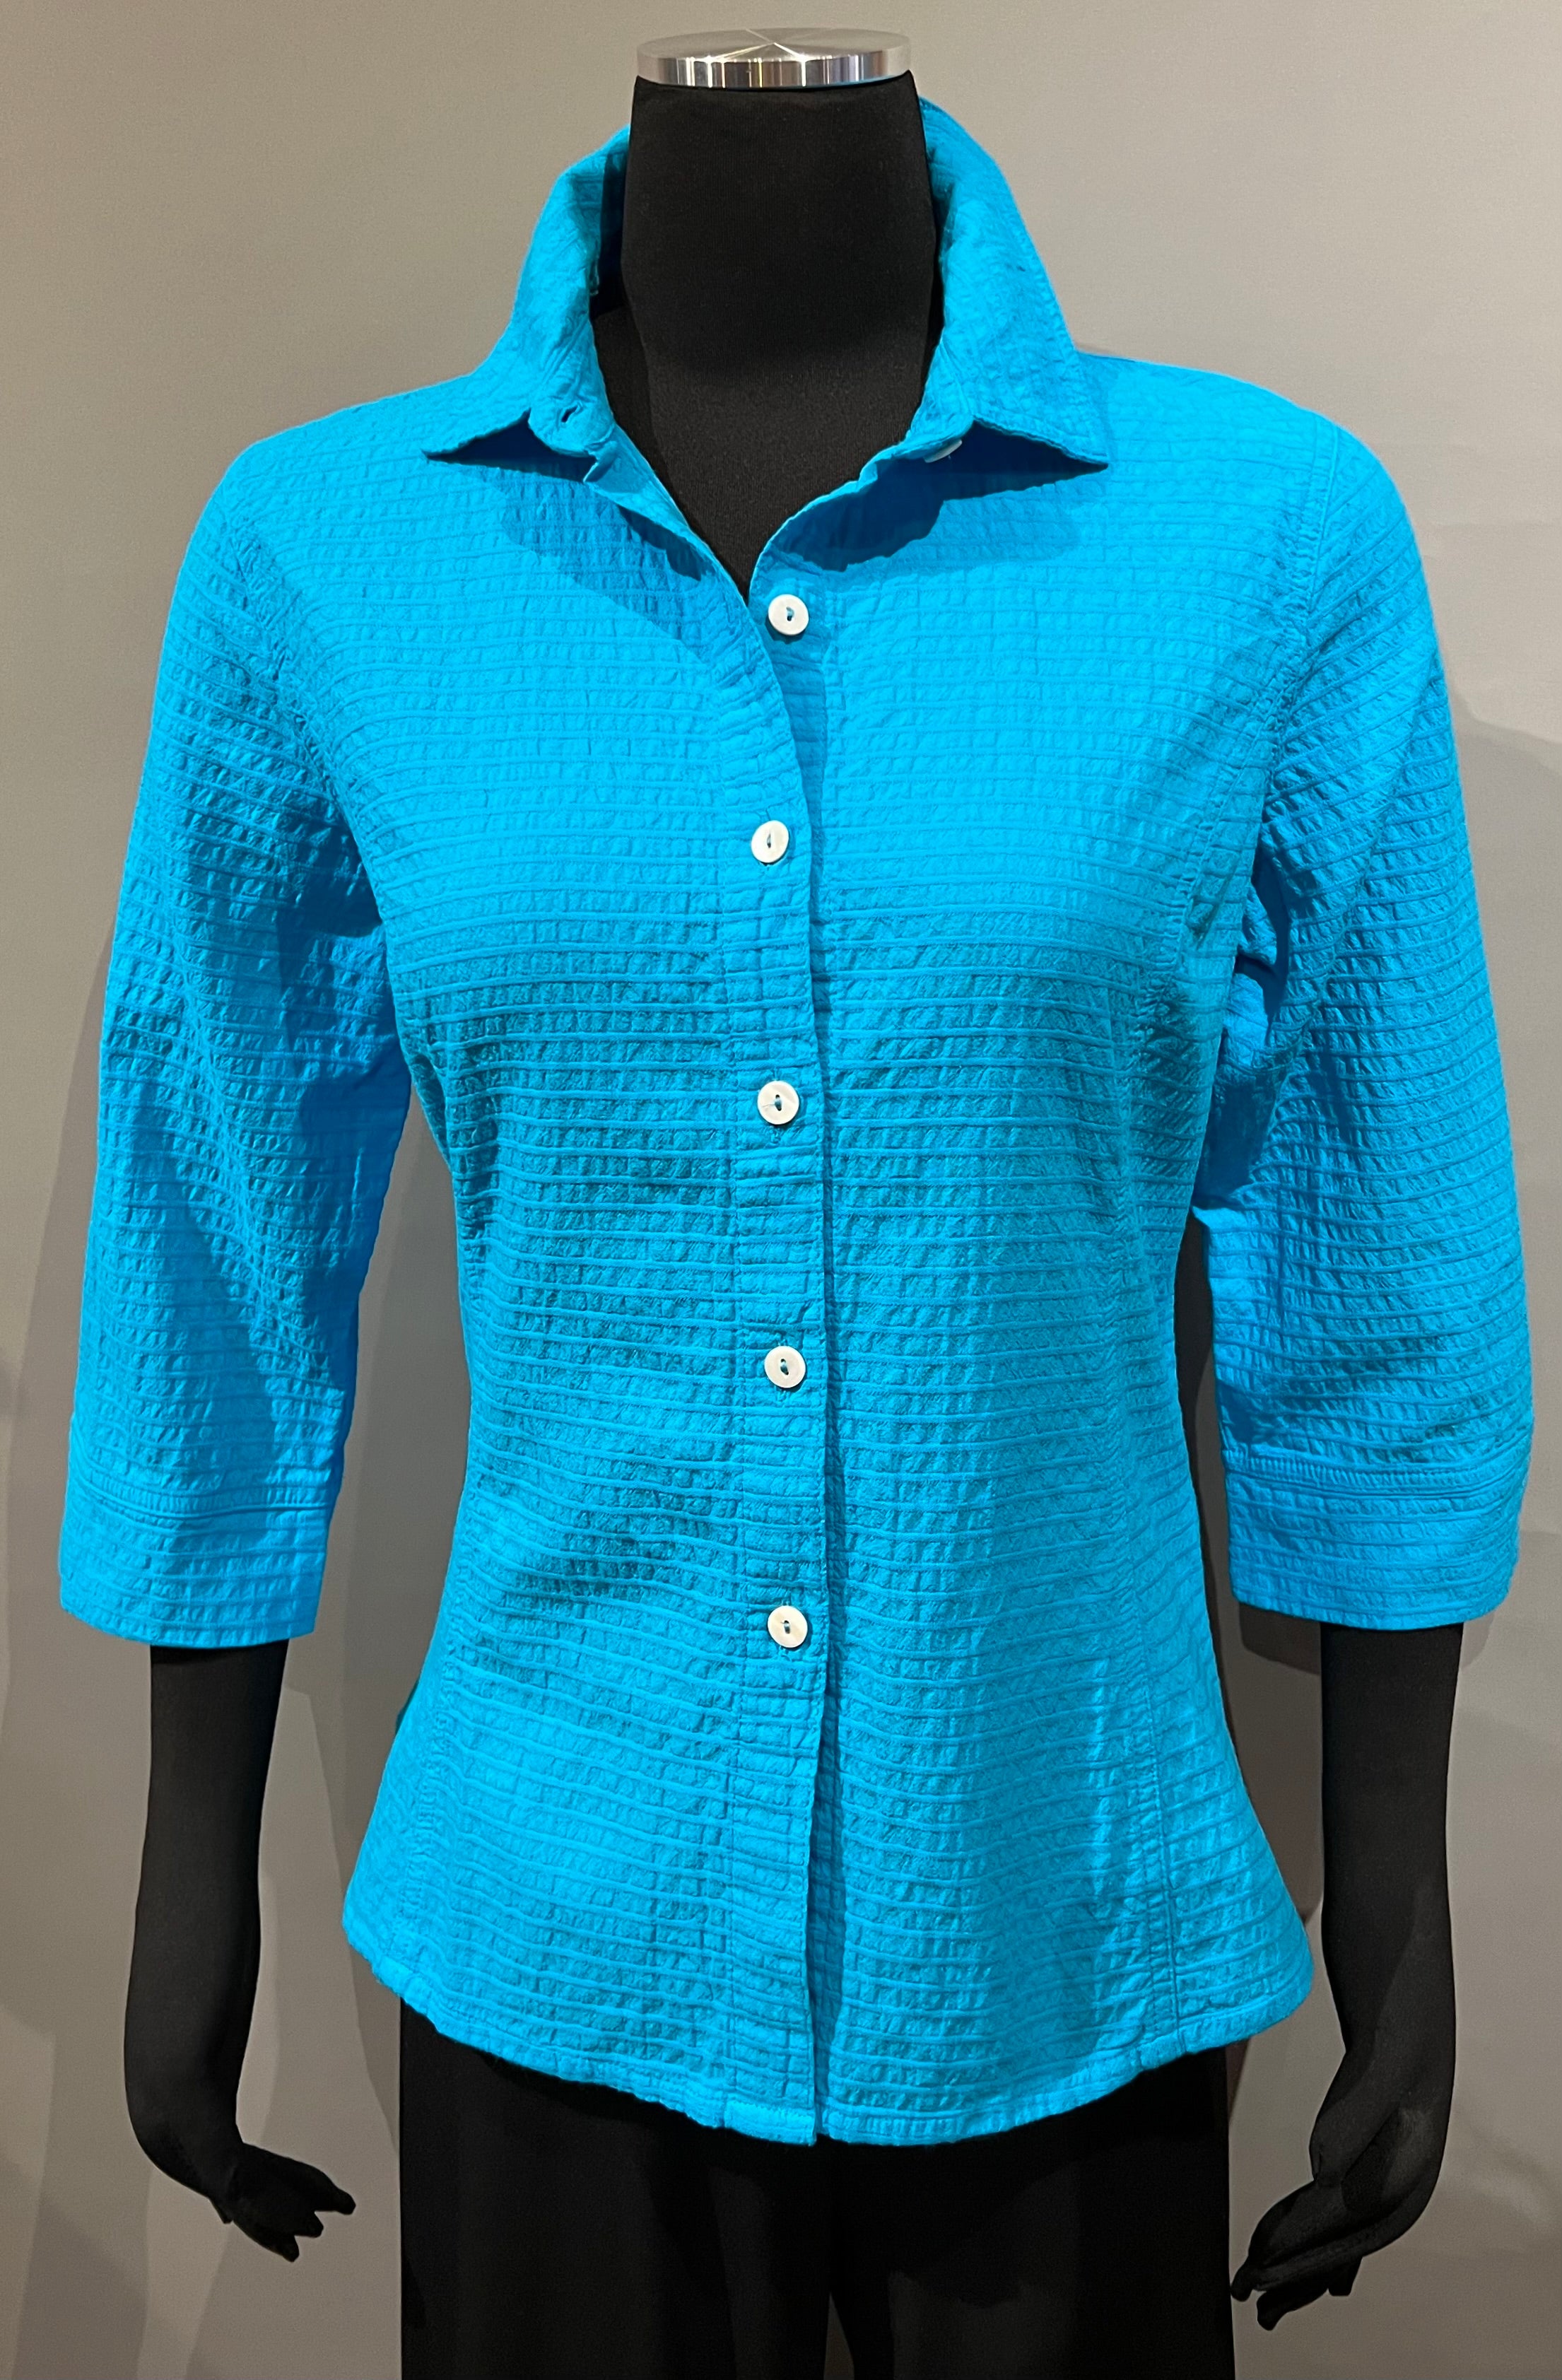 Focus By JJ Turquoise Button Down Shirt